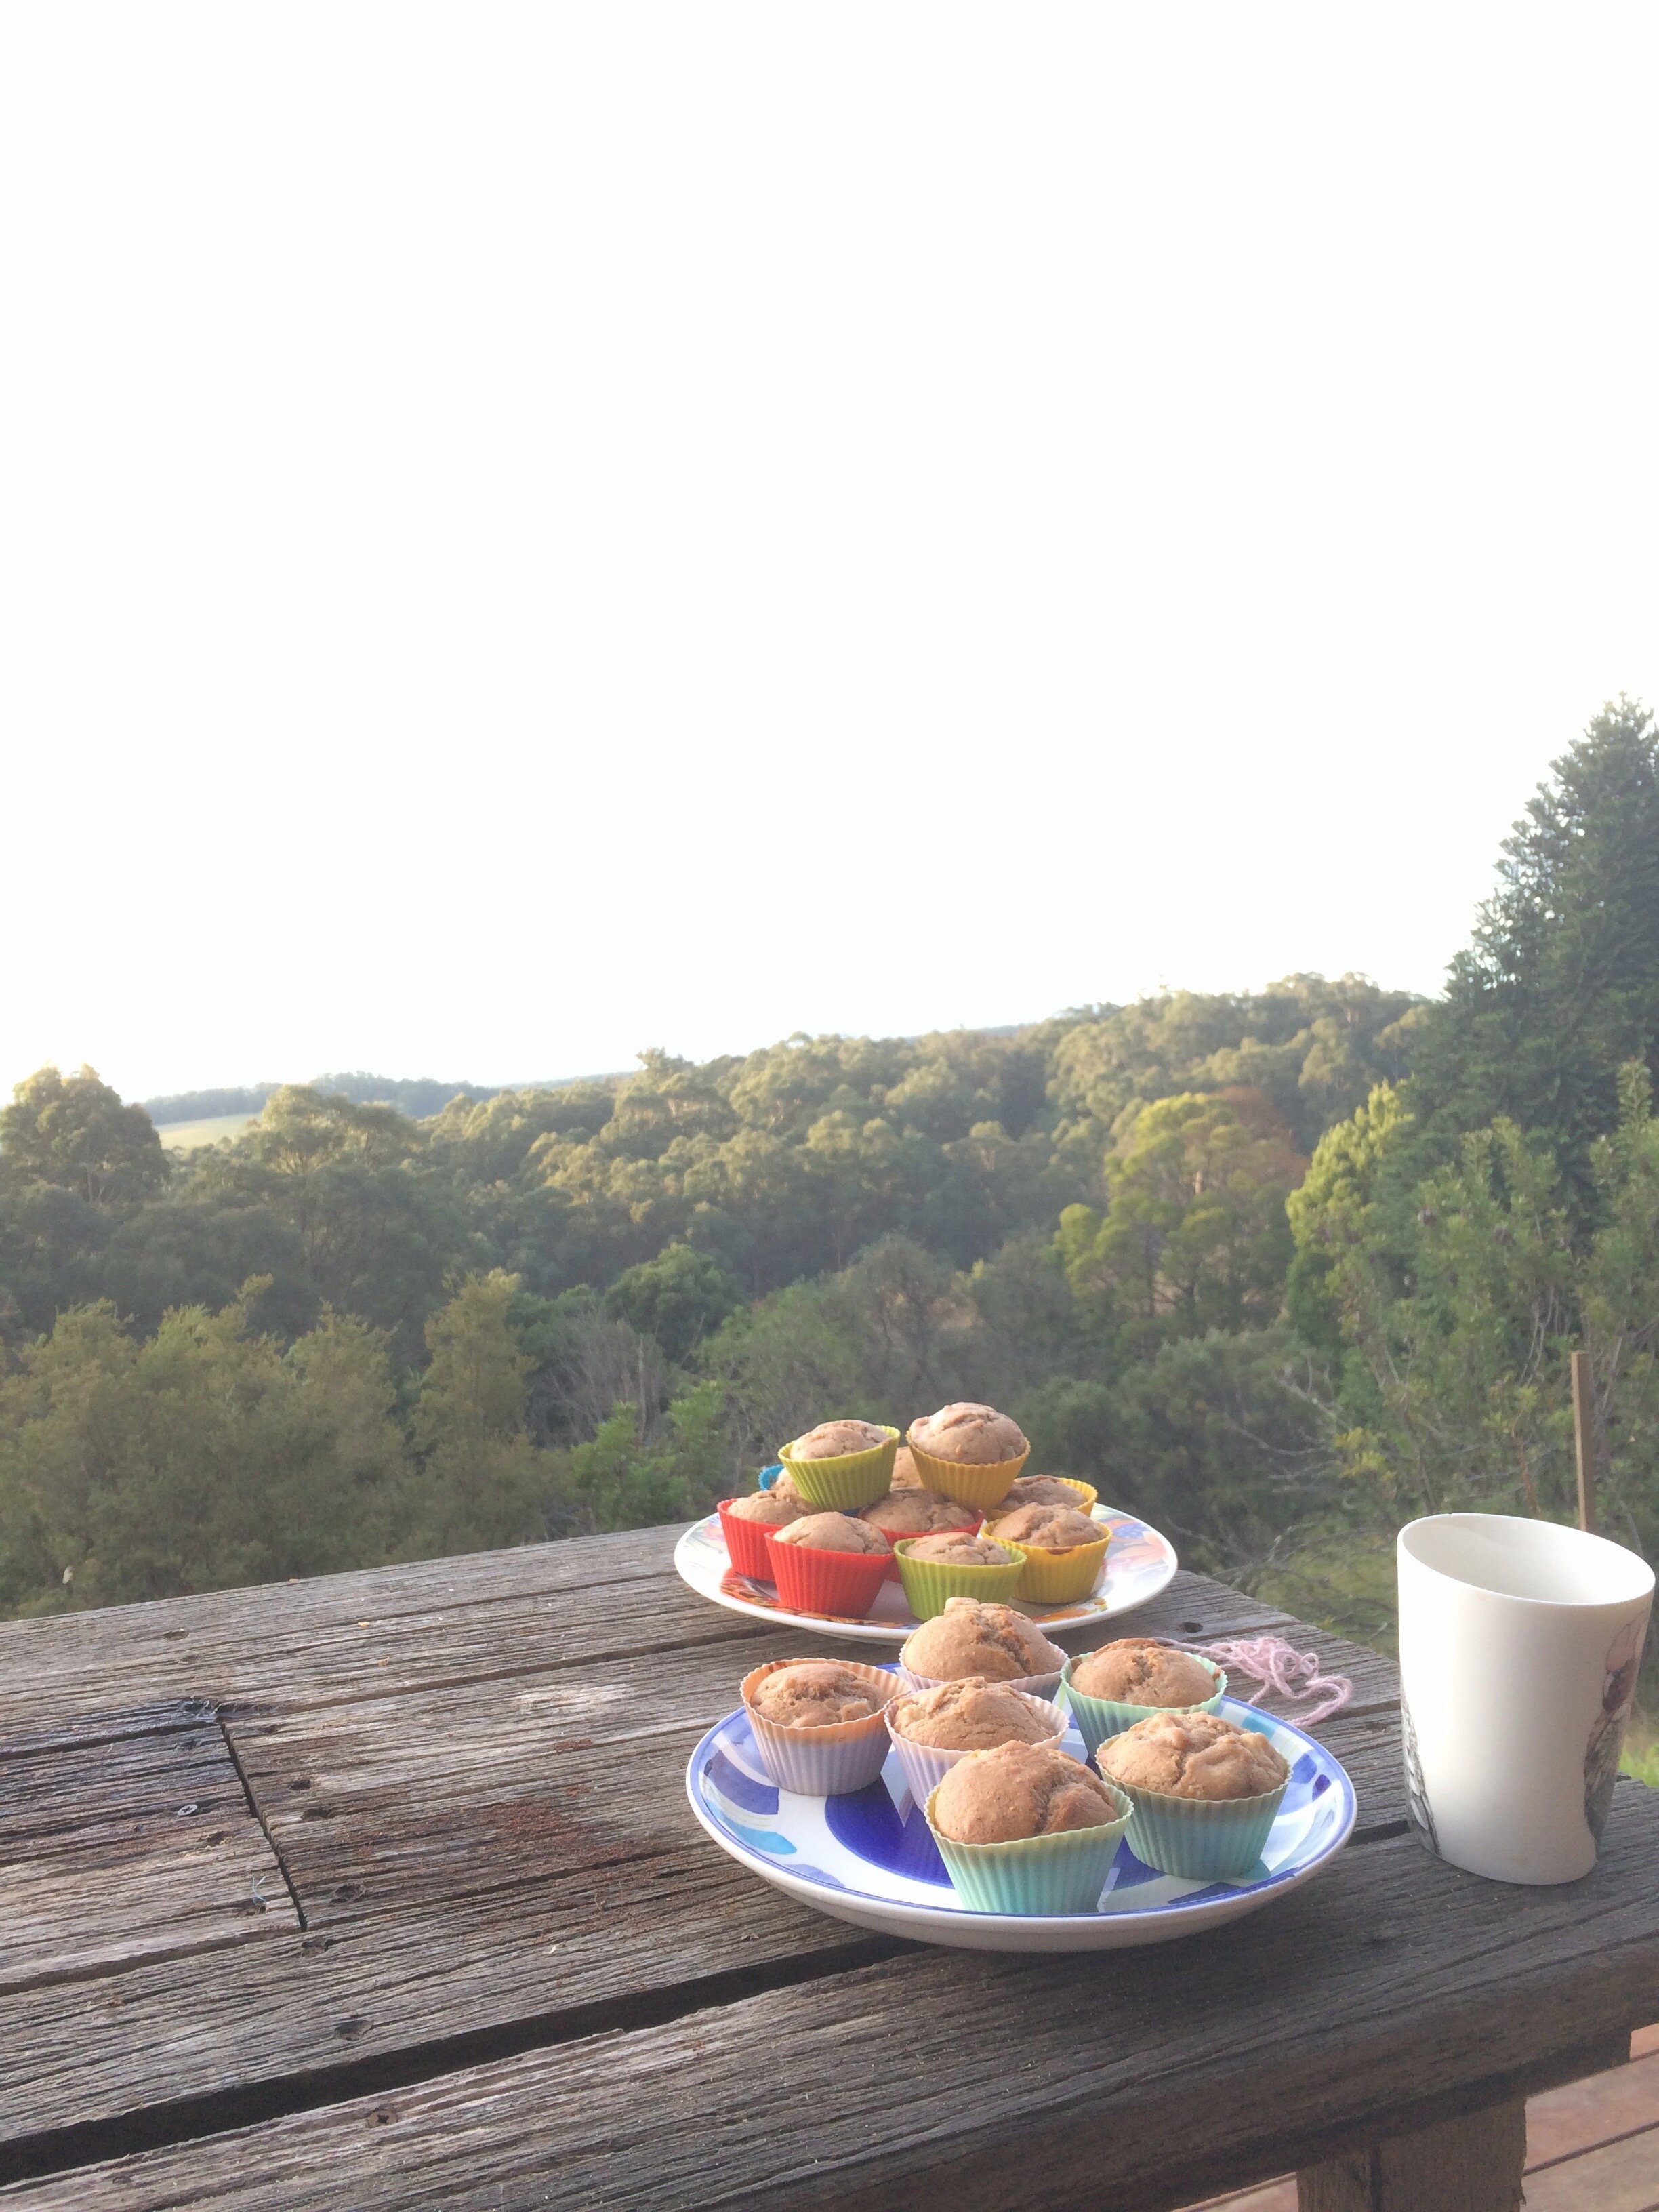 Two plates of muffins in colourful pans on outdoor table with view of trees